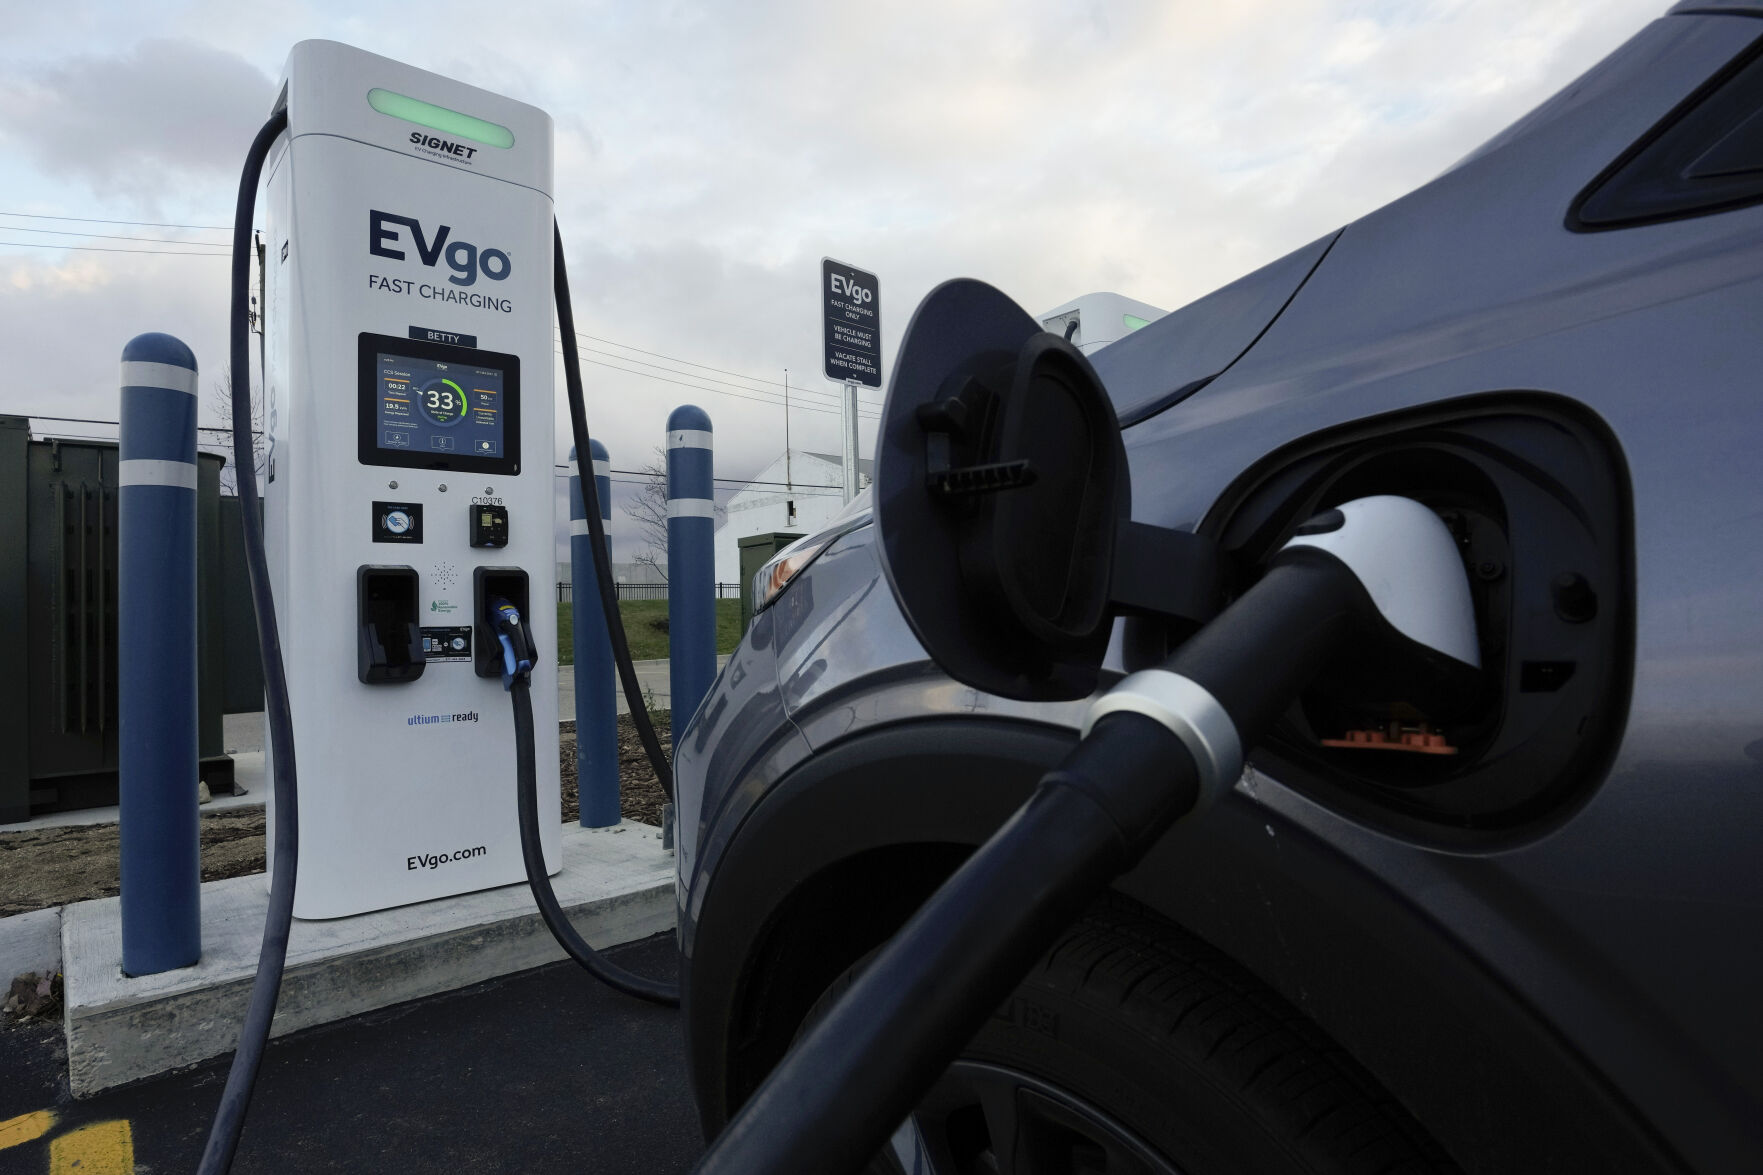 <p>FILE - An electric vehicle charges at an EVgo fast charging station in Detroit on Nov. 16, 2022. The Biden administration is proposing strict new automobile pollution limits that would require as many as two-thirds of new vehicles sold in the U.S. to be electric by 2032 — a nearly tenfold increase over current EV sales, according to an announcement from the Environmental Protection Agency Wednesday, April 12, 2023. (AP Photo/Paul Sancya, File)</p>   PHOTO CREDIT: Paul Sancya 